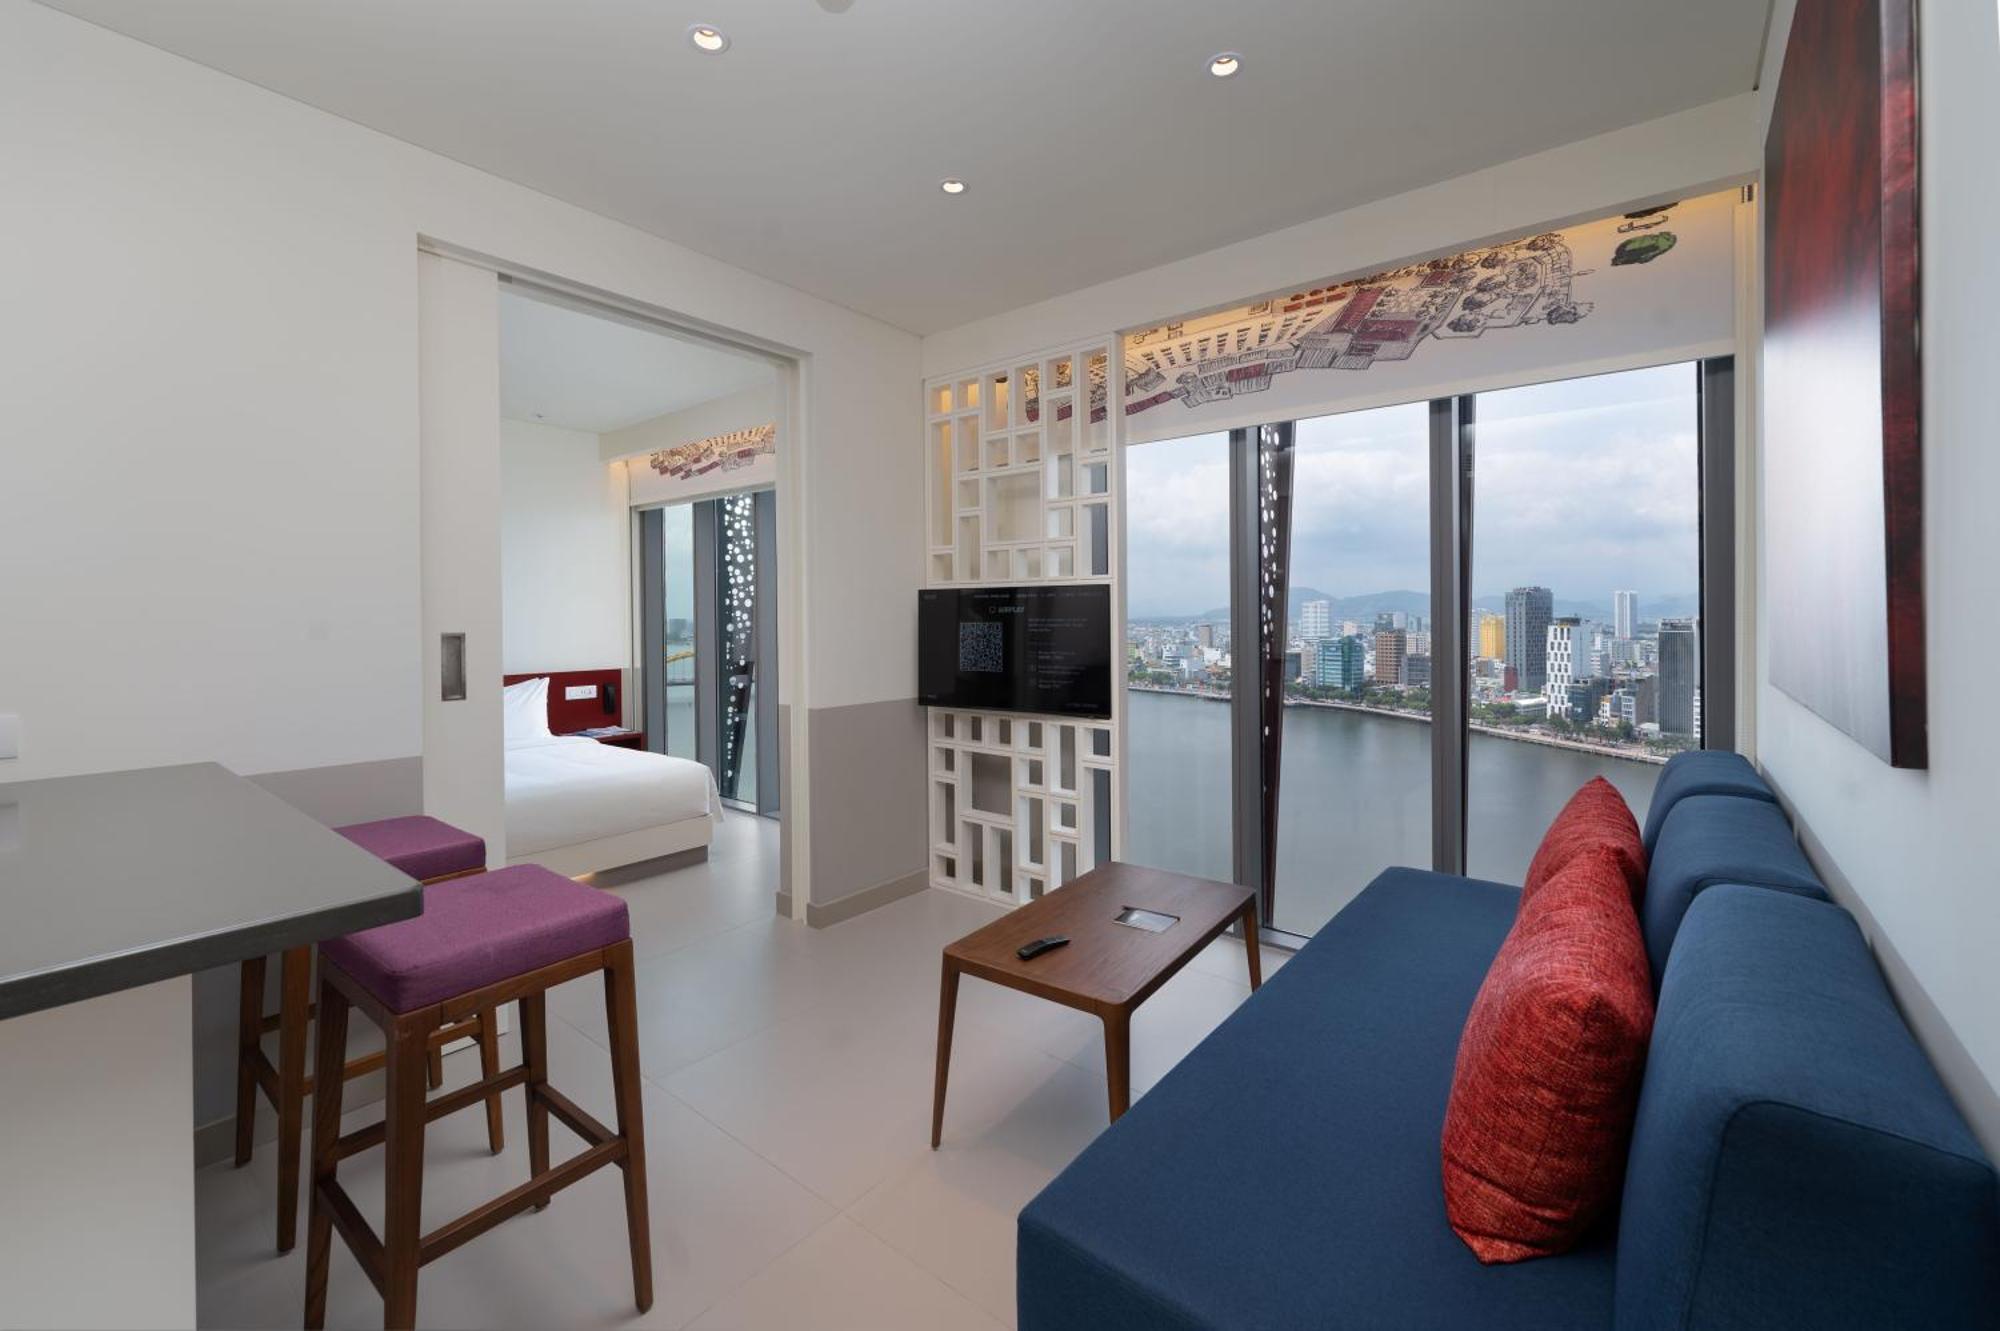 Wink Hotel Danang Riverside - 24Hrs Stay & Rooftop With Sunset View 外观 照片